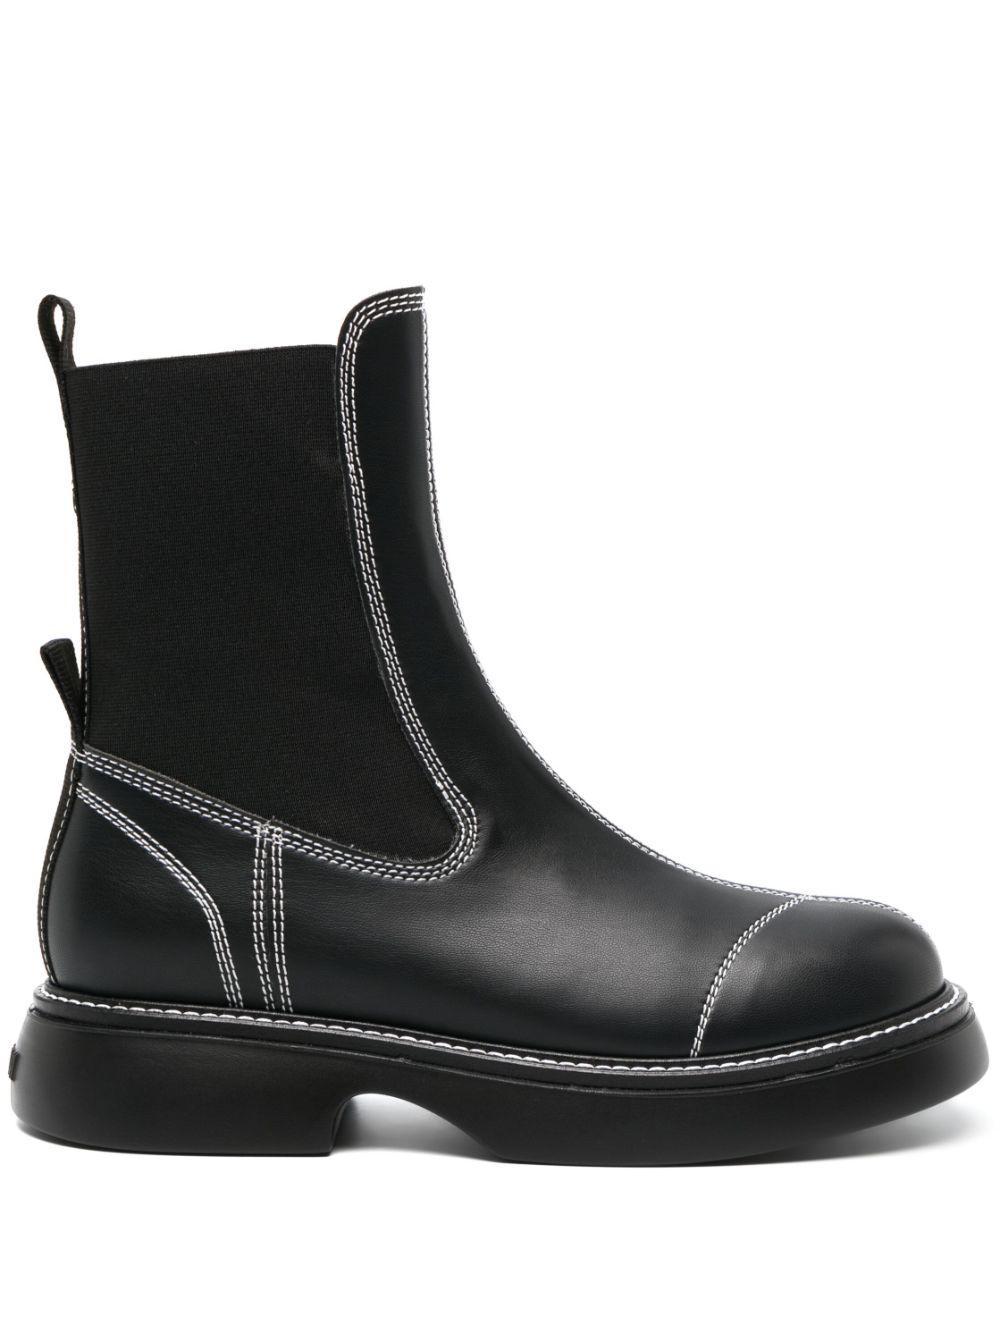 GANNI topstitched leather Chelsea boots - Black